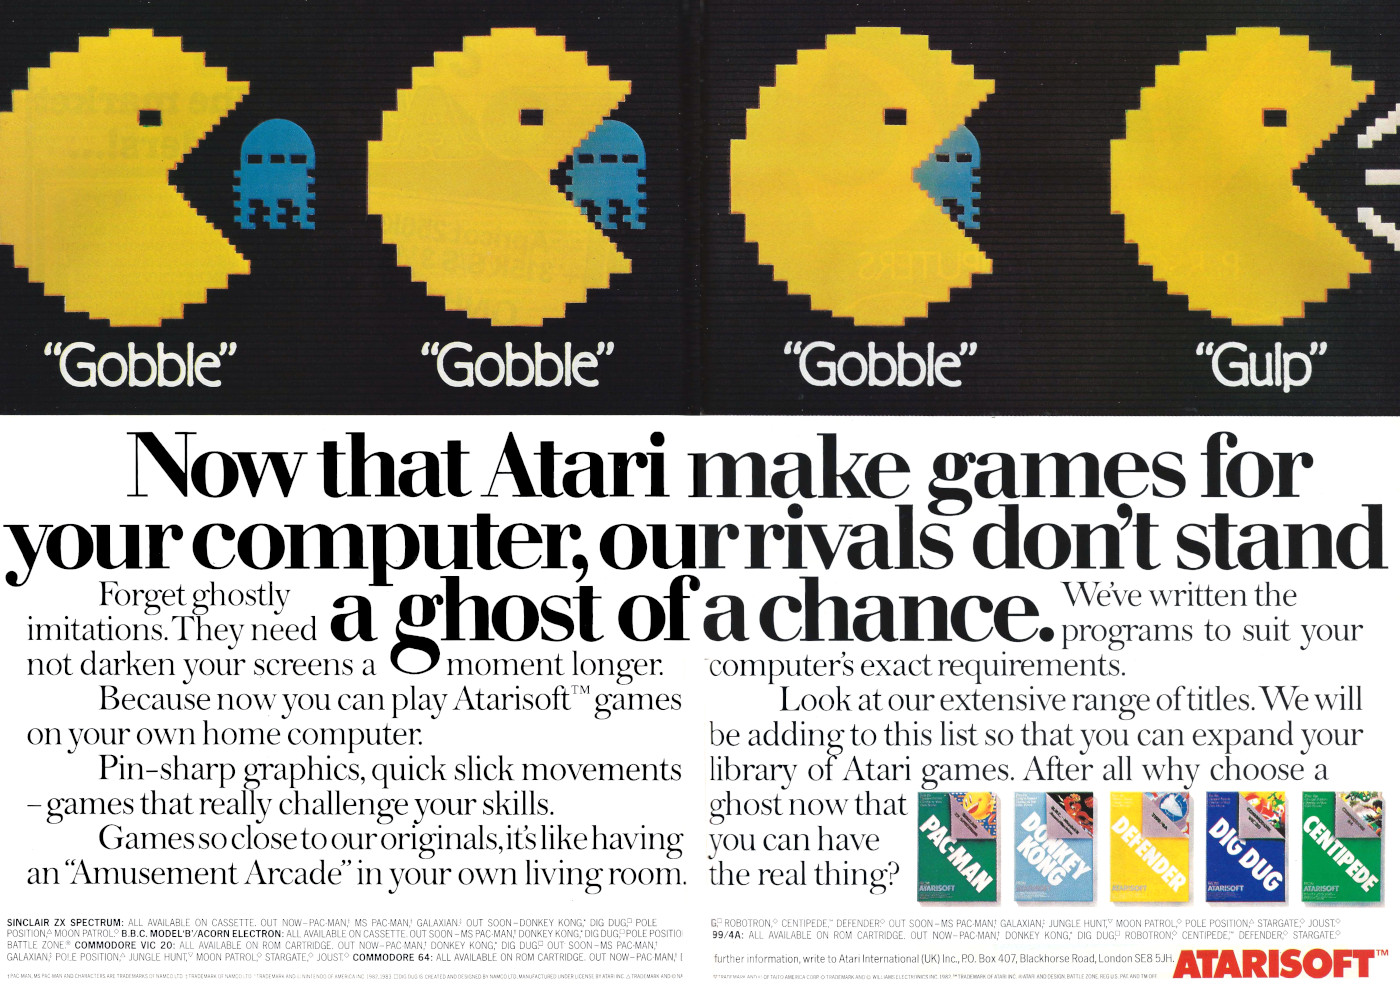 An advert from Atarisoft, which features a dig at clones of the company's games, like <span class='hilite'><span class='hilite'>Commodore</span></span>'s version of Pac-Man, which it called Jelly Monsters after legal pressure from Atari. From Personal Computer World, March 1984